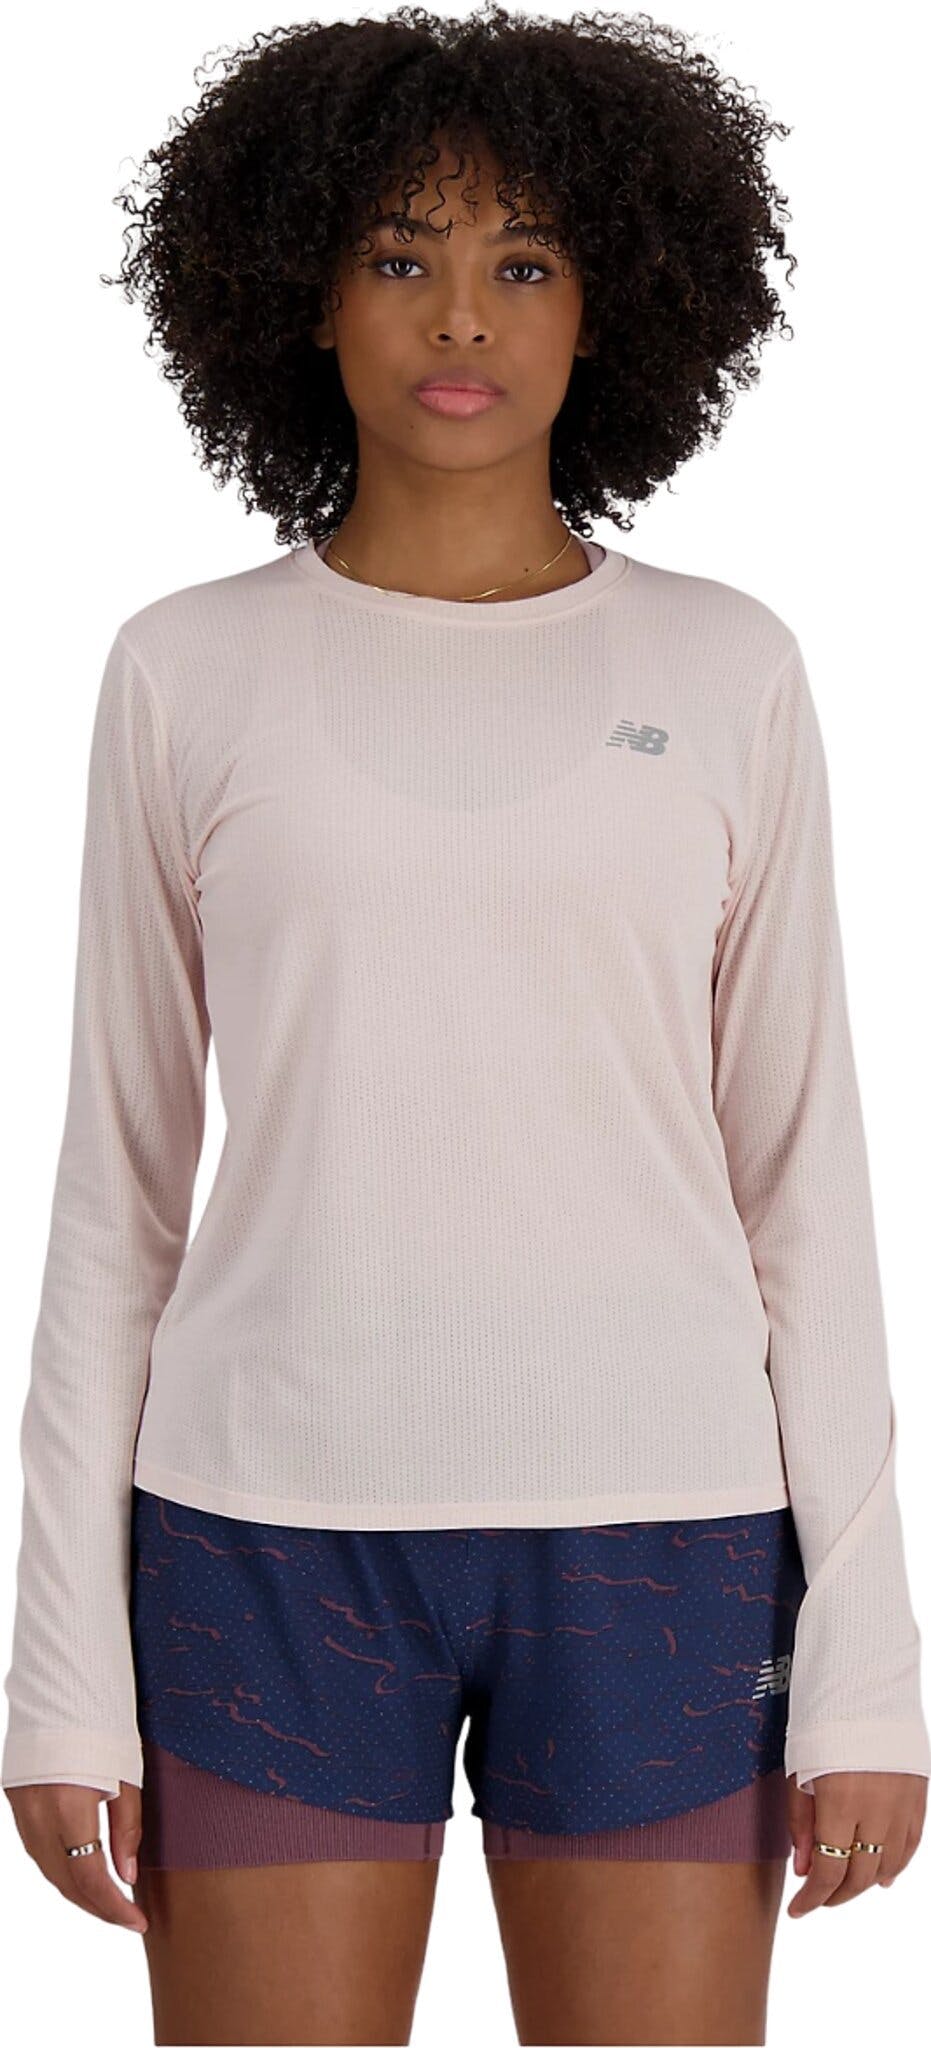 Product image for Athletics Long Sleeve - Women's